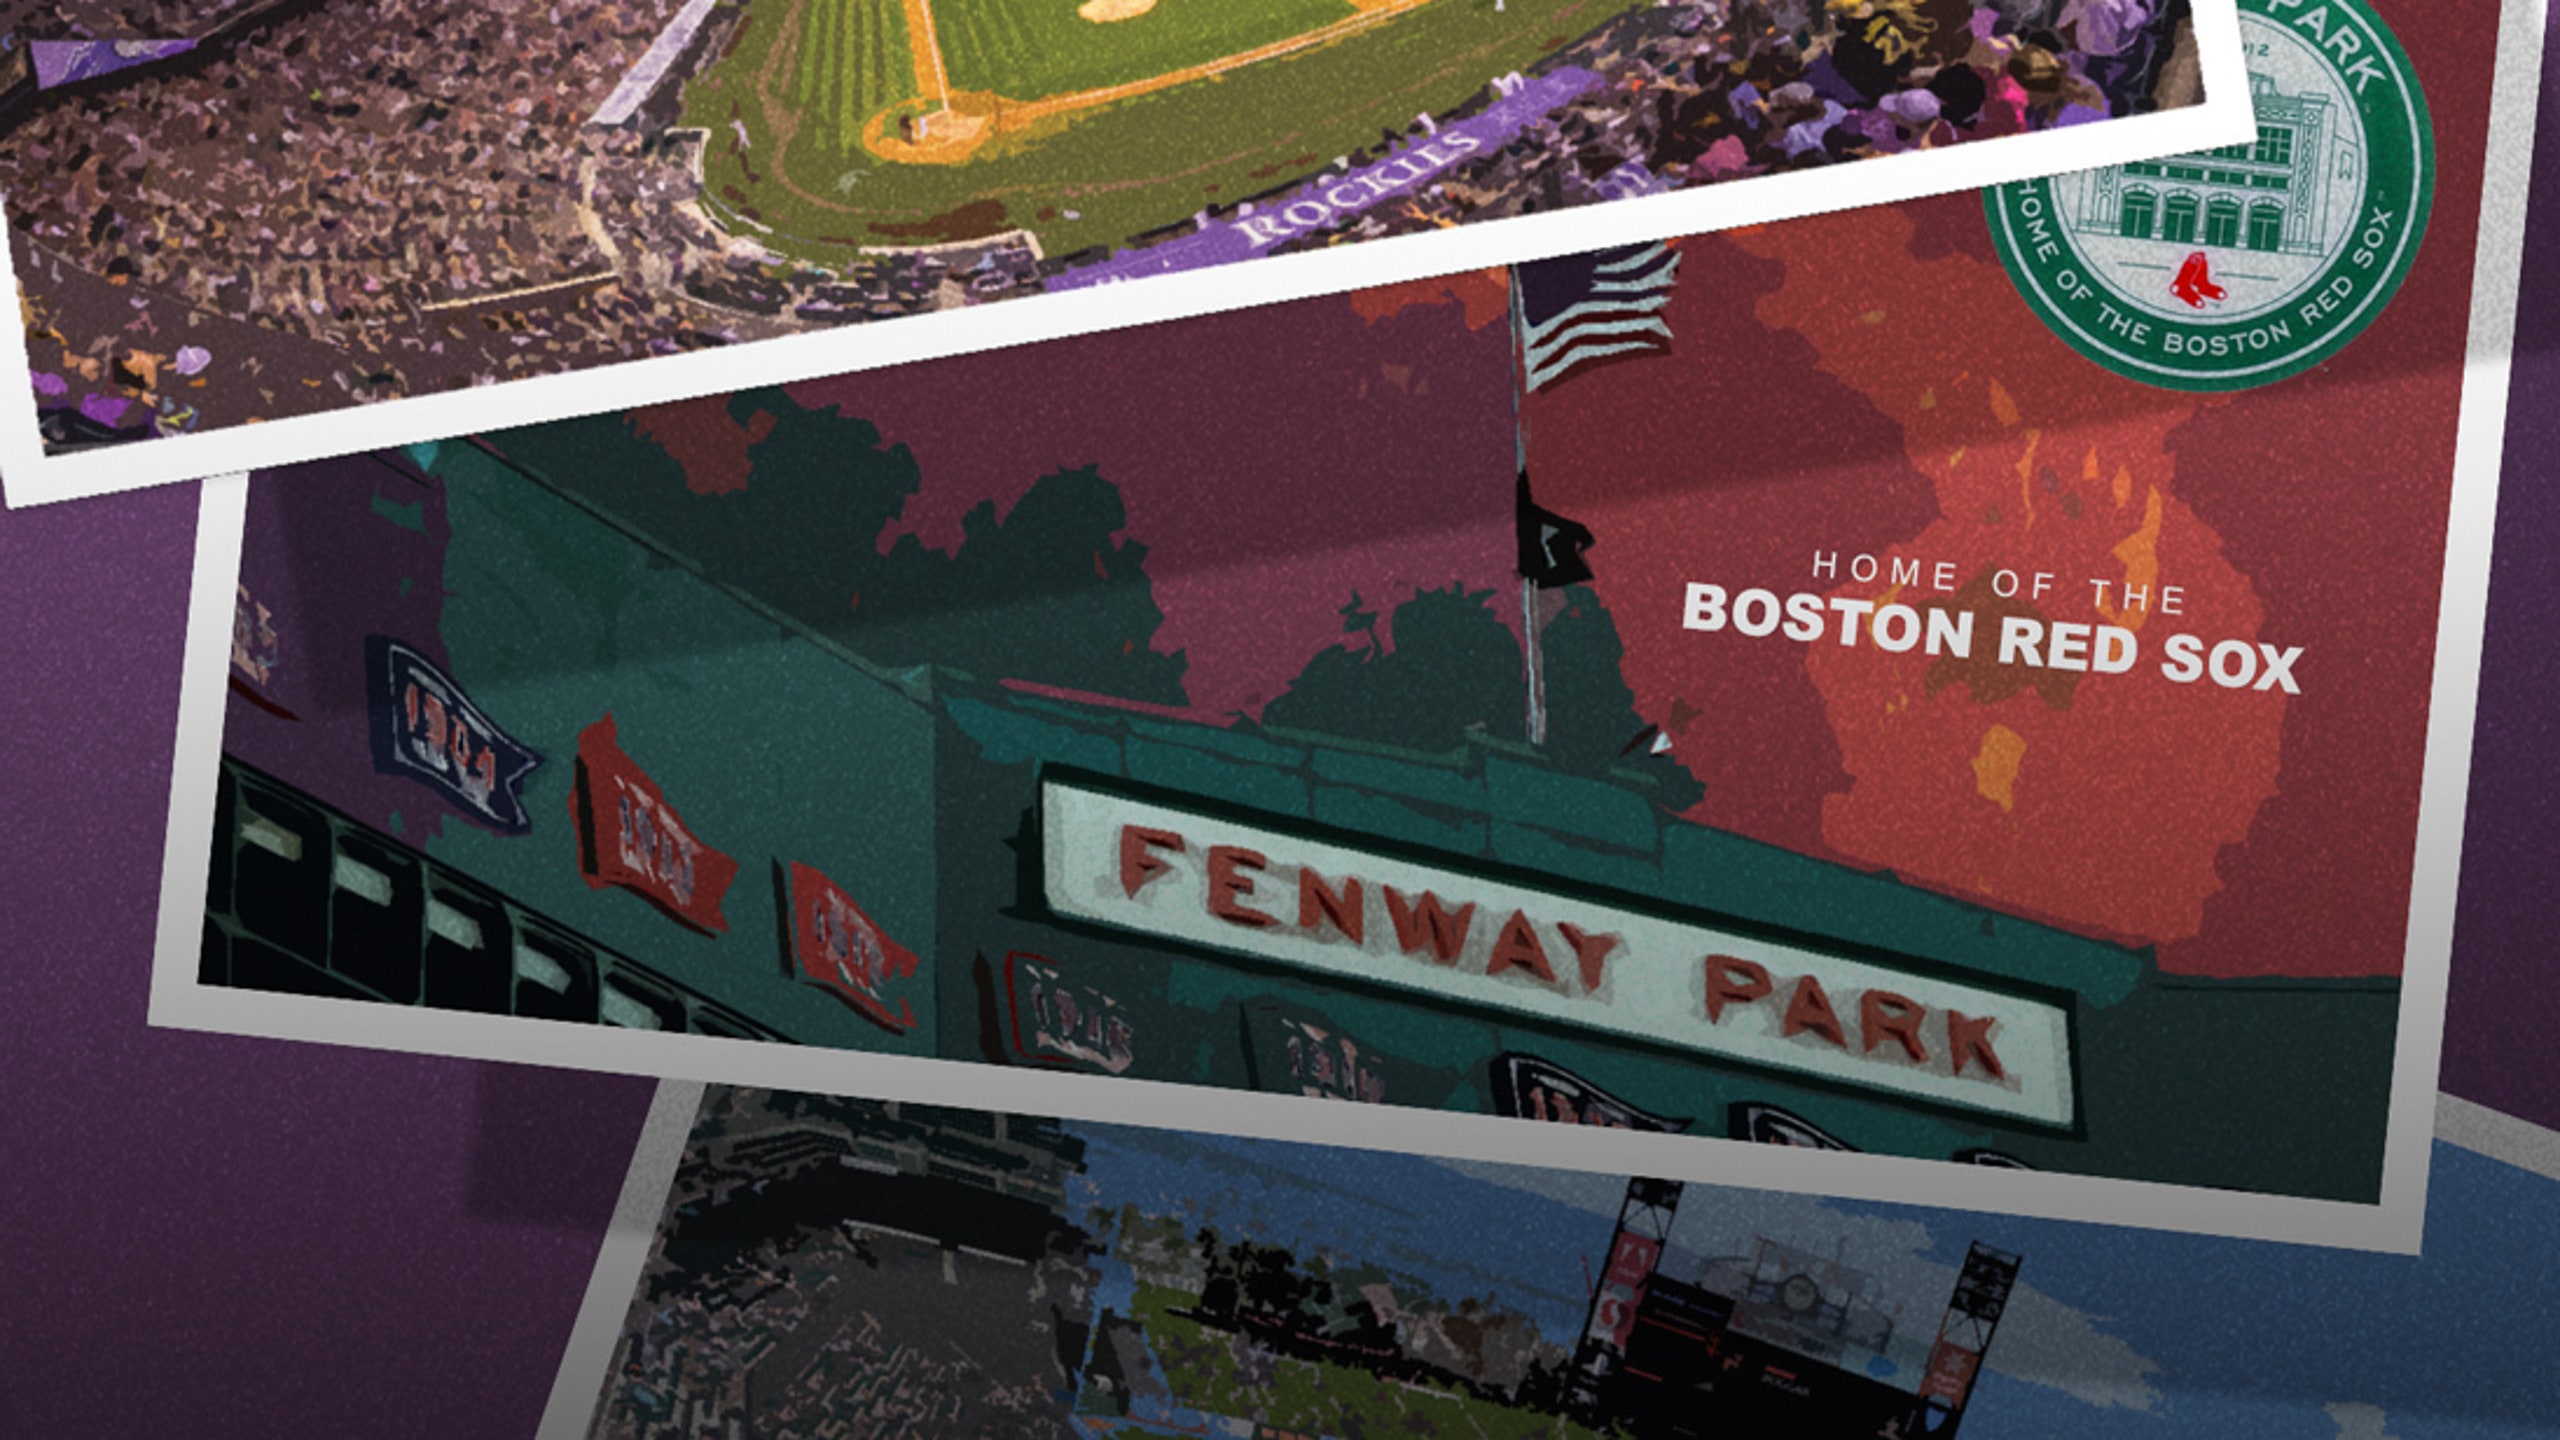 Ranking MLB stadiums, from perfection for the Giants to a bummer for